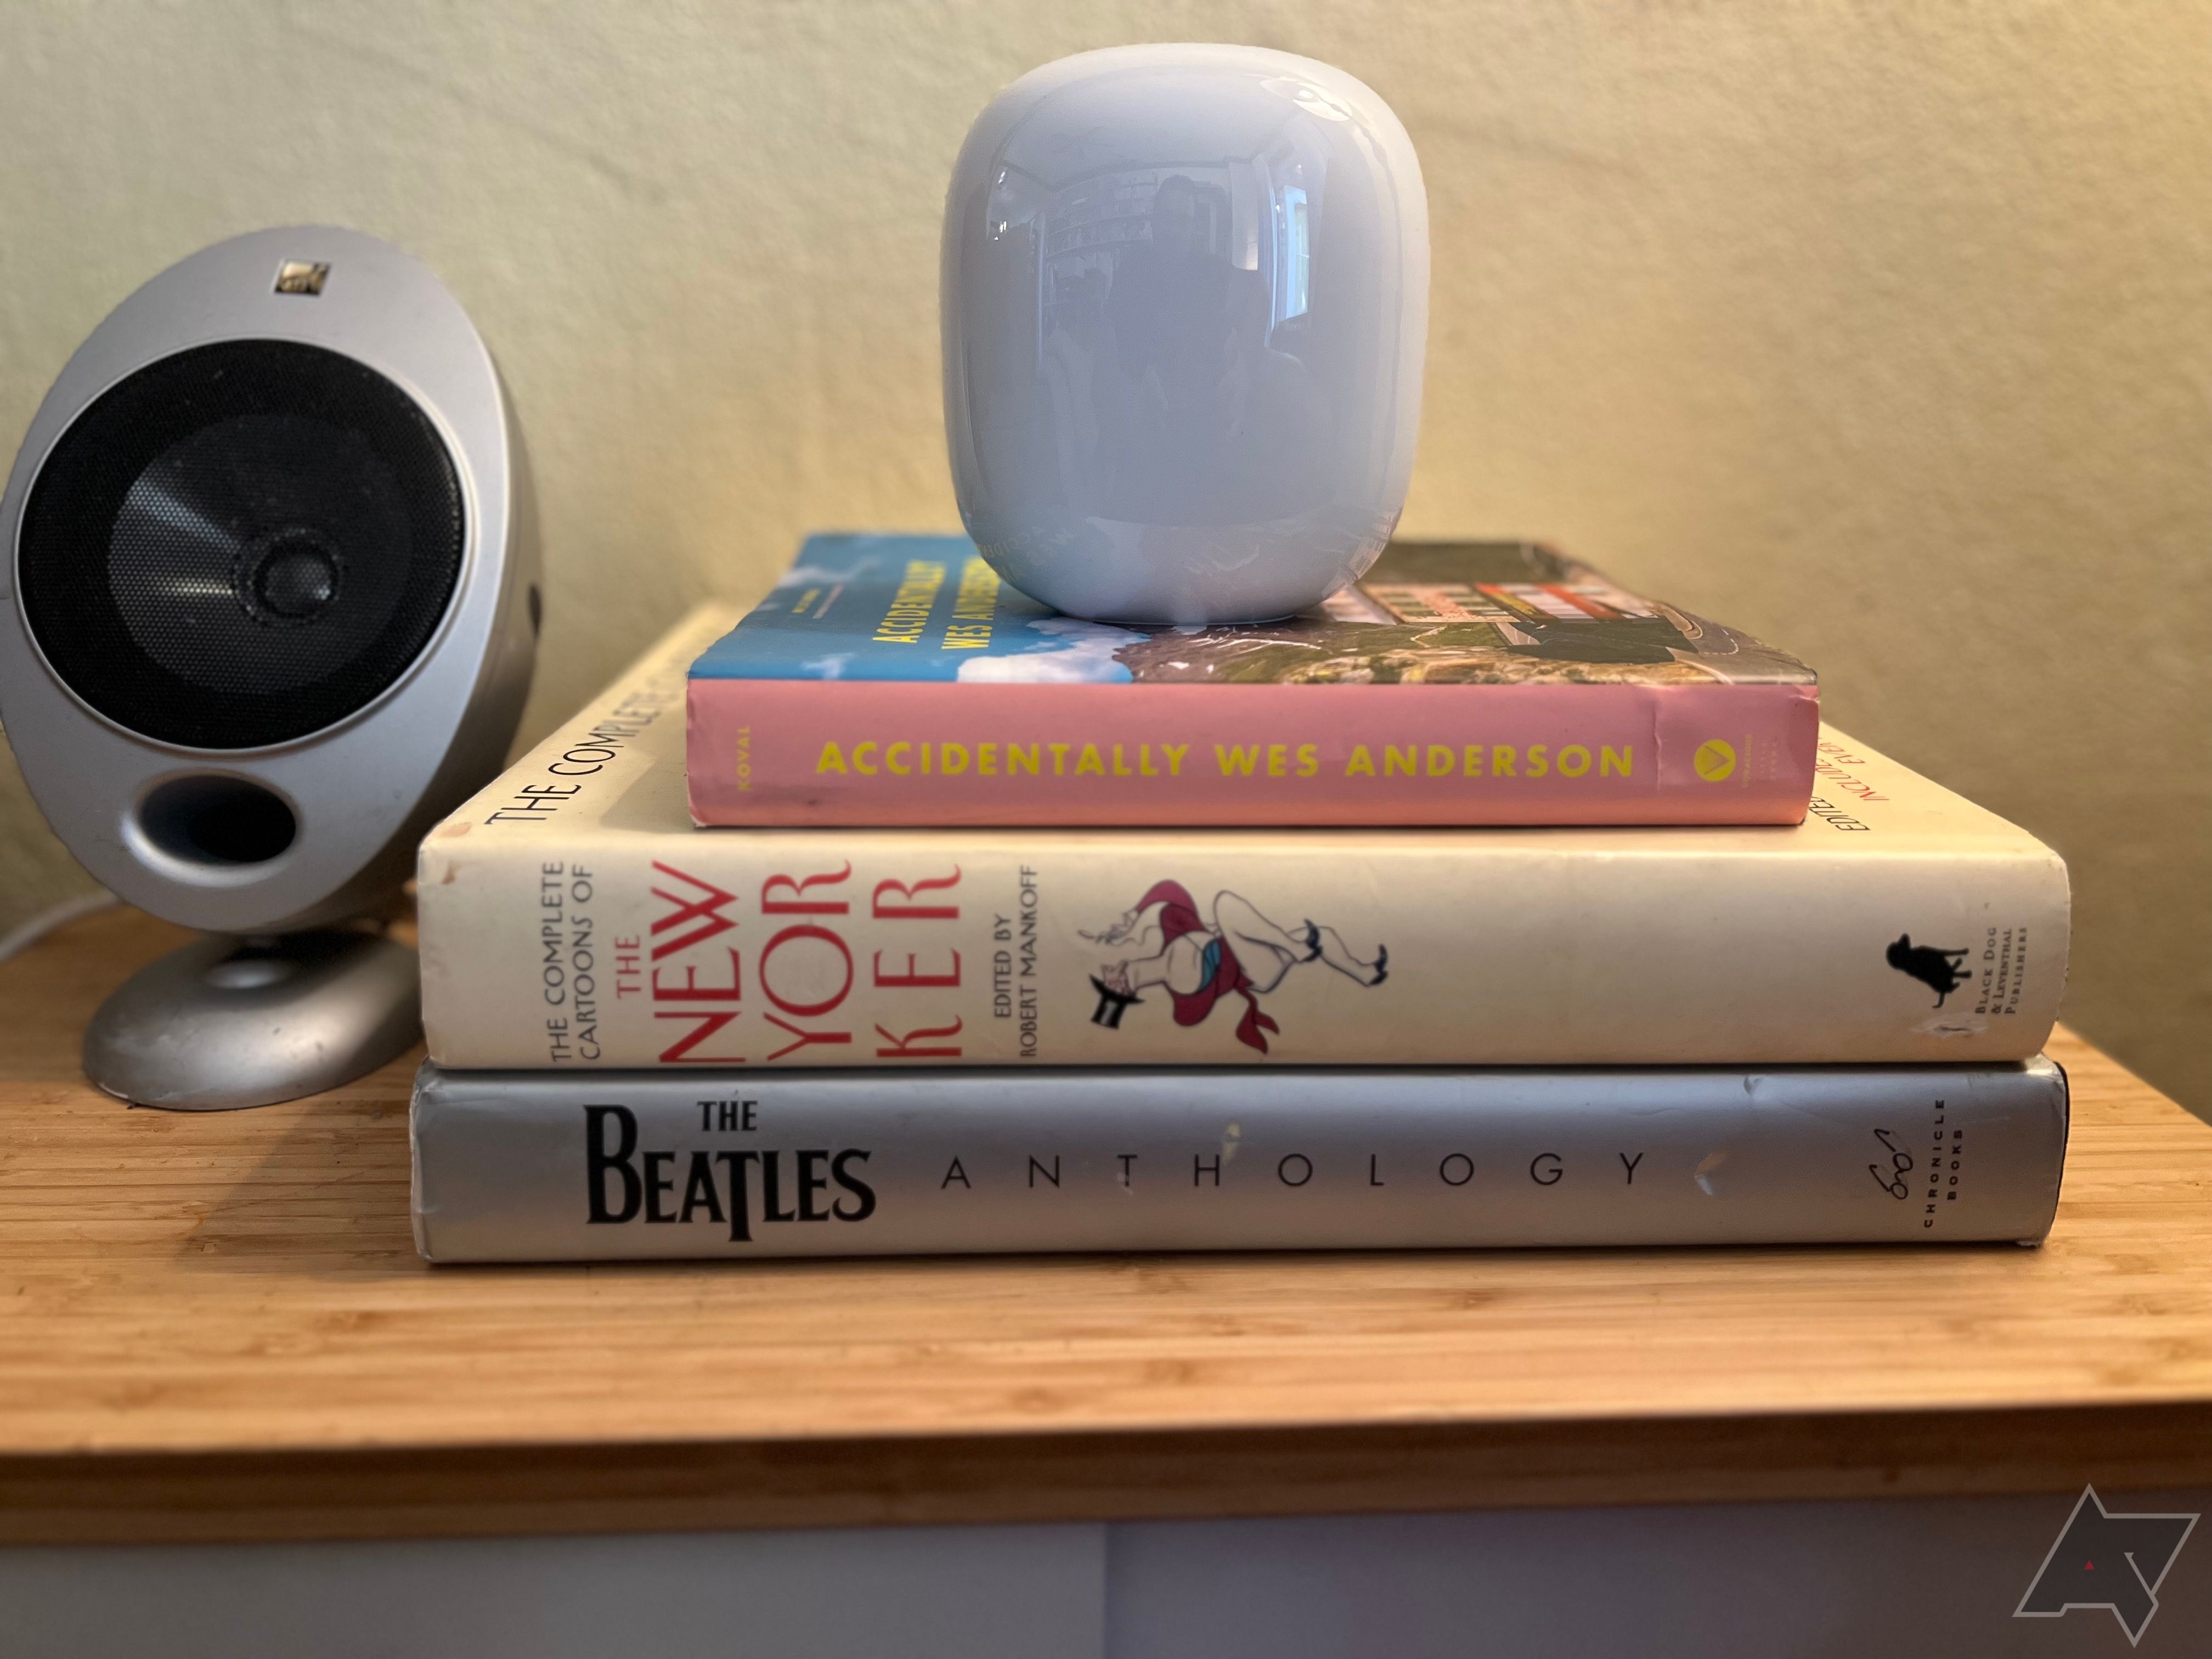 Google Nest Wifi Pro on a stack of books on a side table